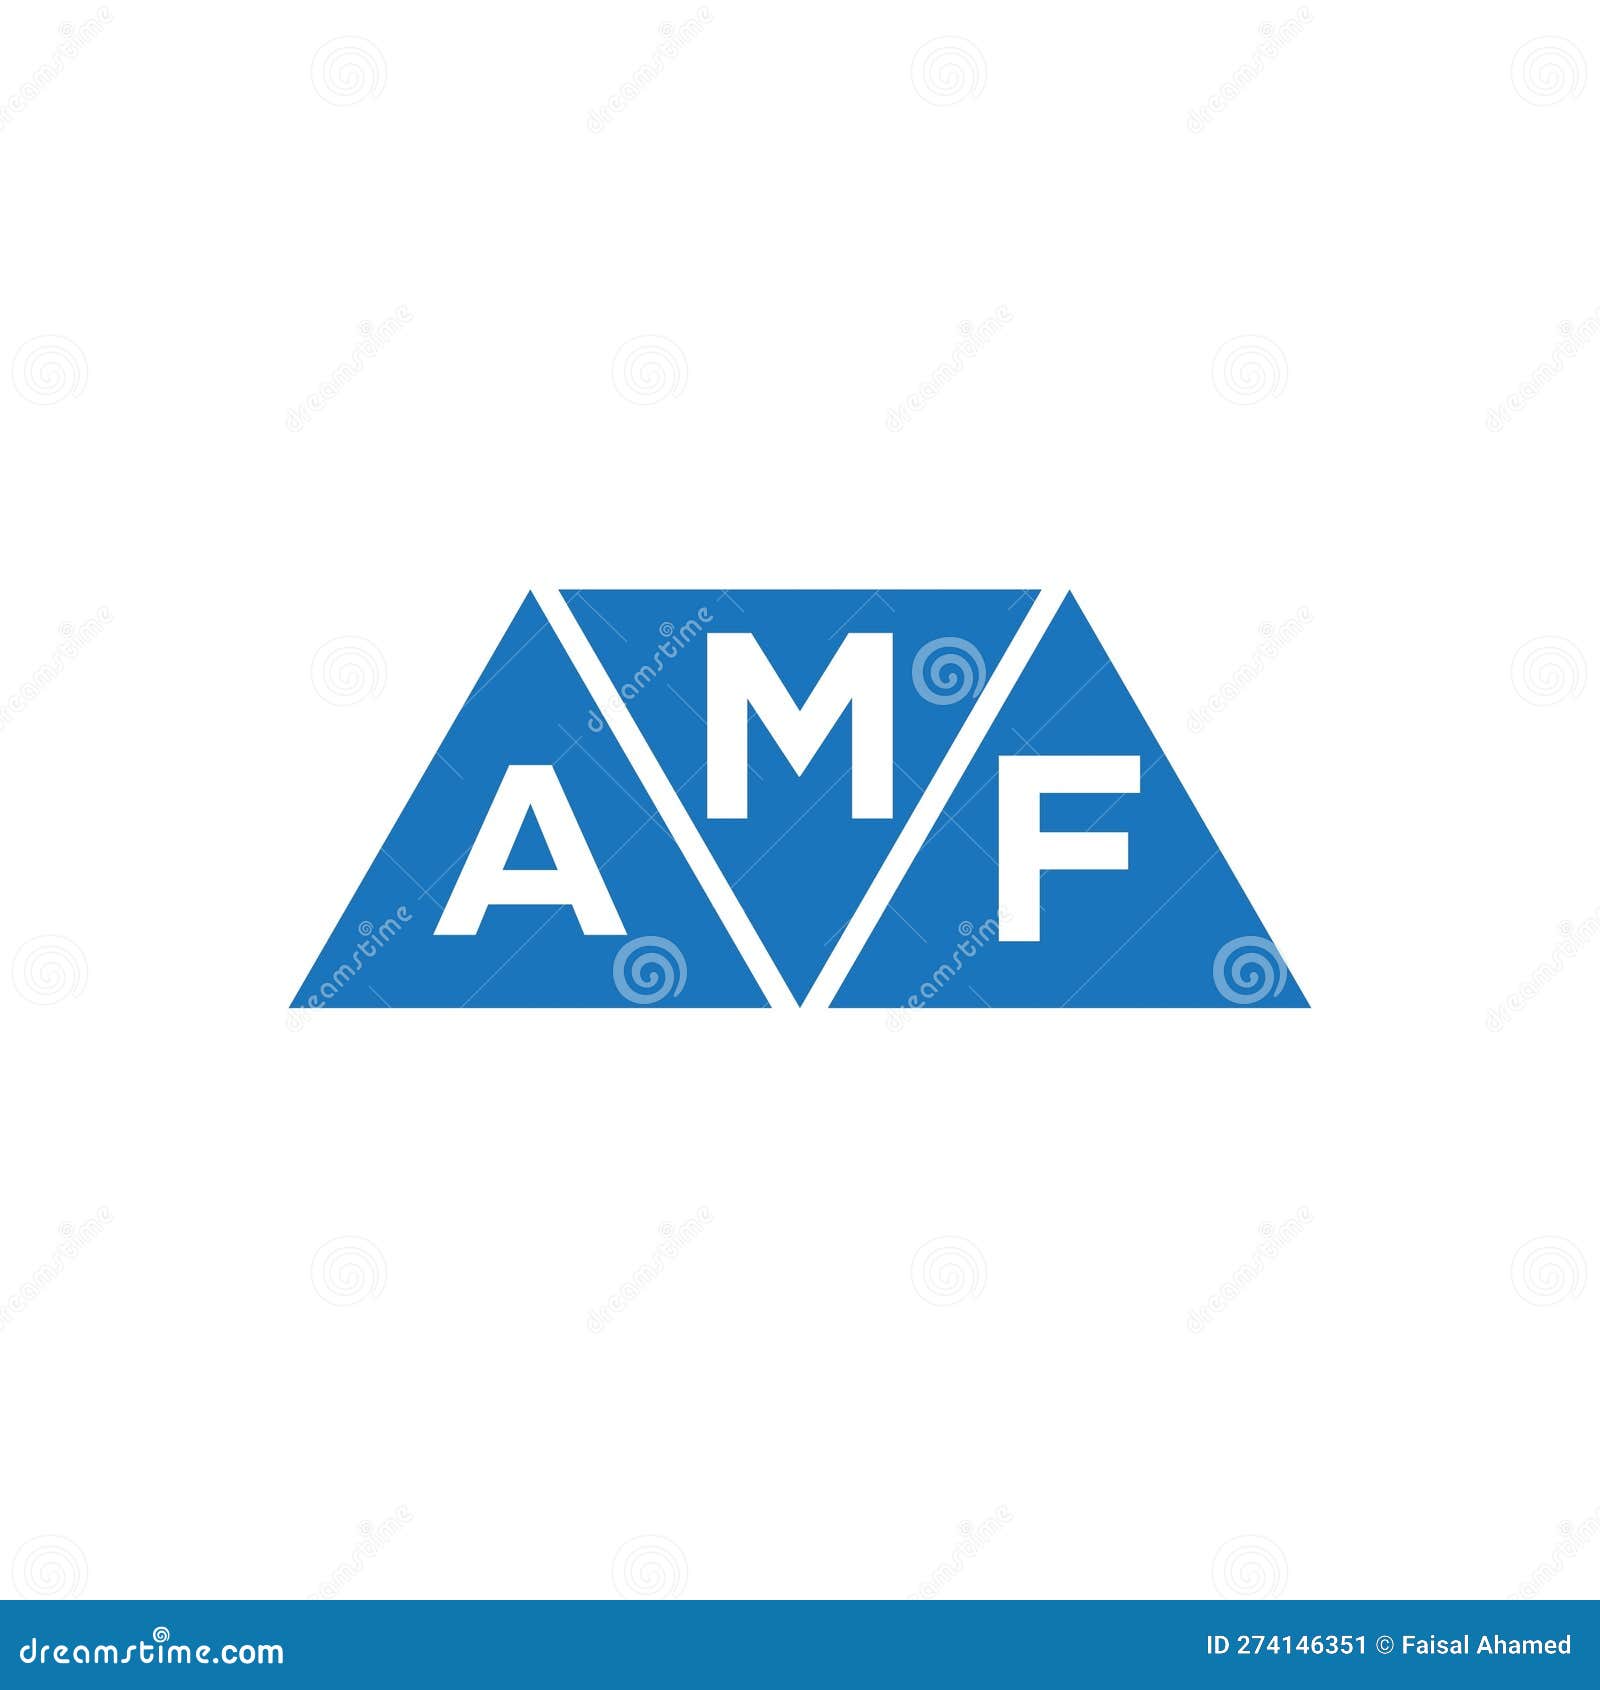 maf abstract initial logo  on white background. maf creative initials letter logo concept